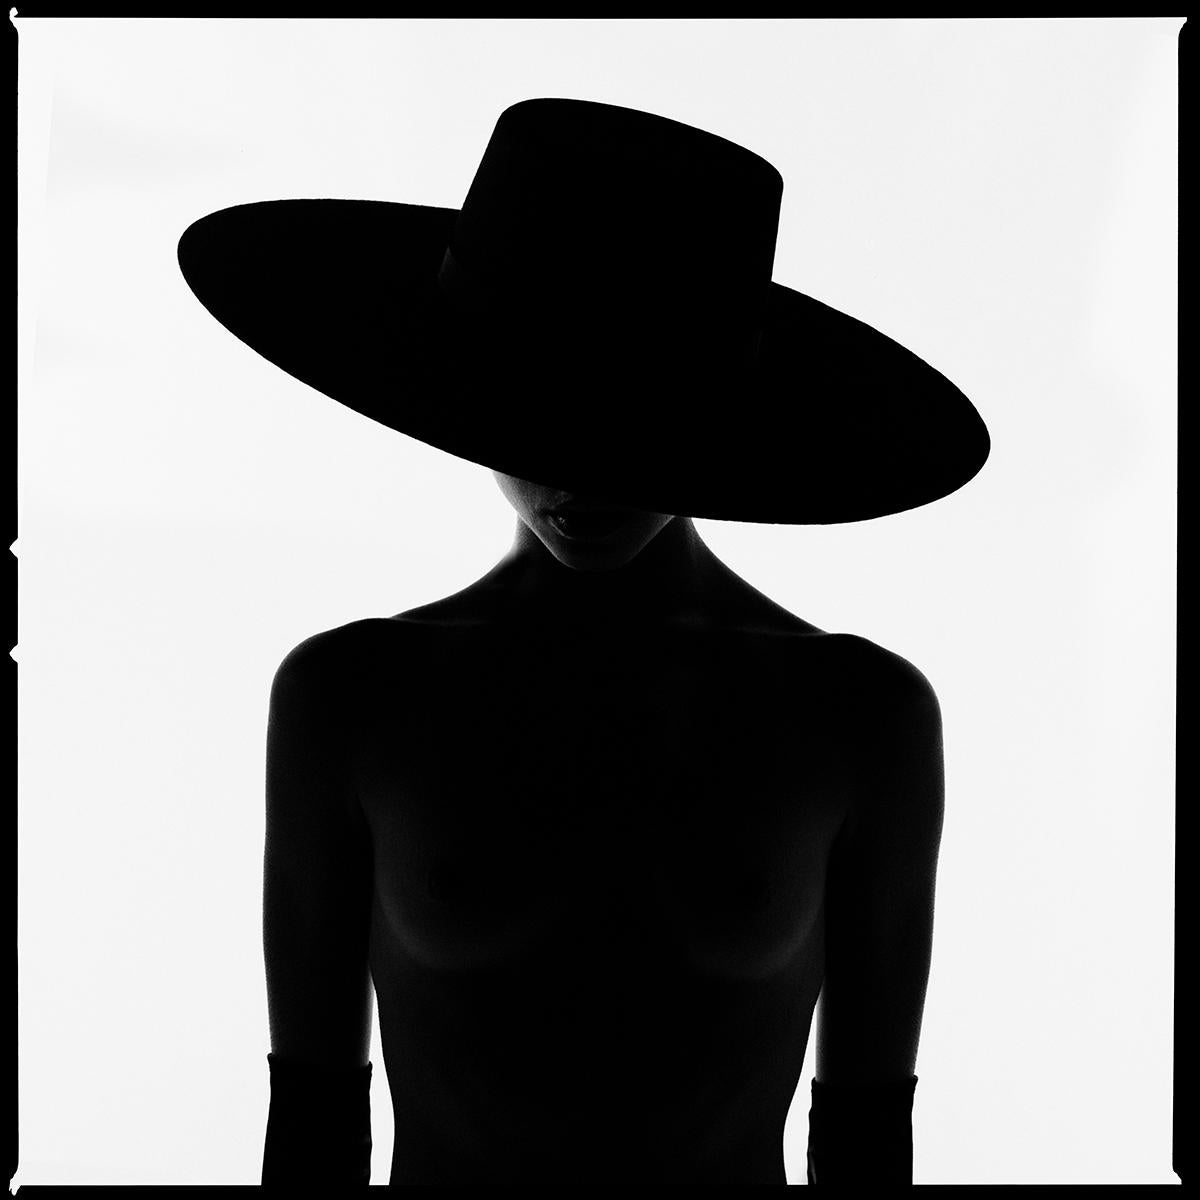 Series: Hat and Gloves Silhouette
Chromogenic Print on Kodak Endura Luster Paper
All available sizes and editions:
18" x 18"
30" x 30"
45" x 45"
60" x 60"
70" x 70"
Editions of 3 + 2 Artist Proofs

Tyler Shields is a photographer, film director, and